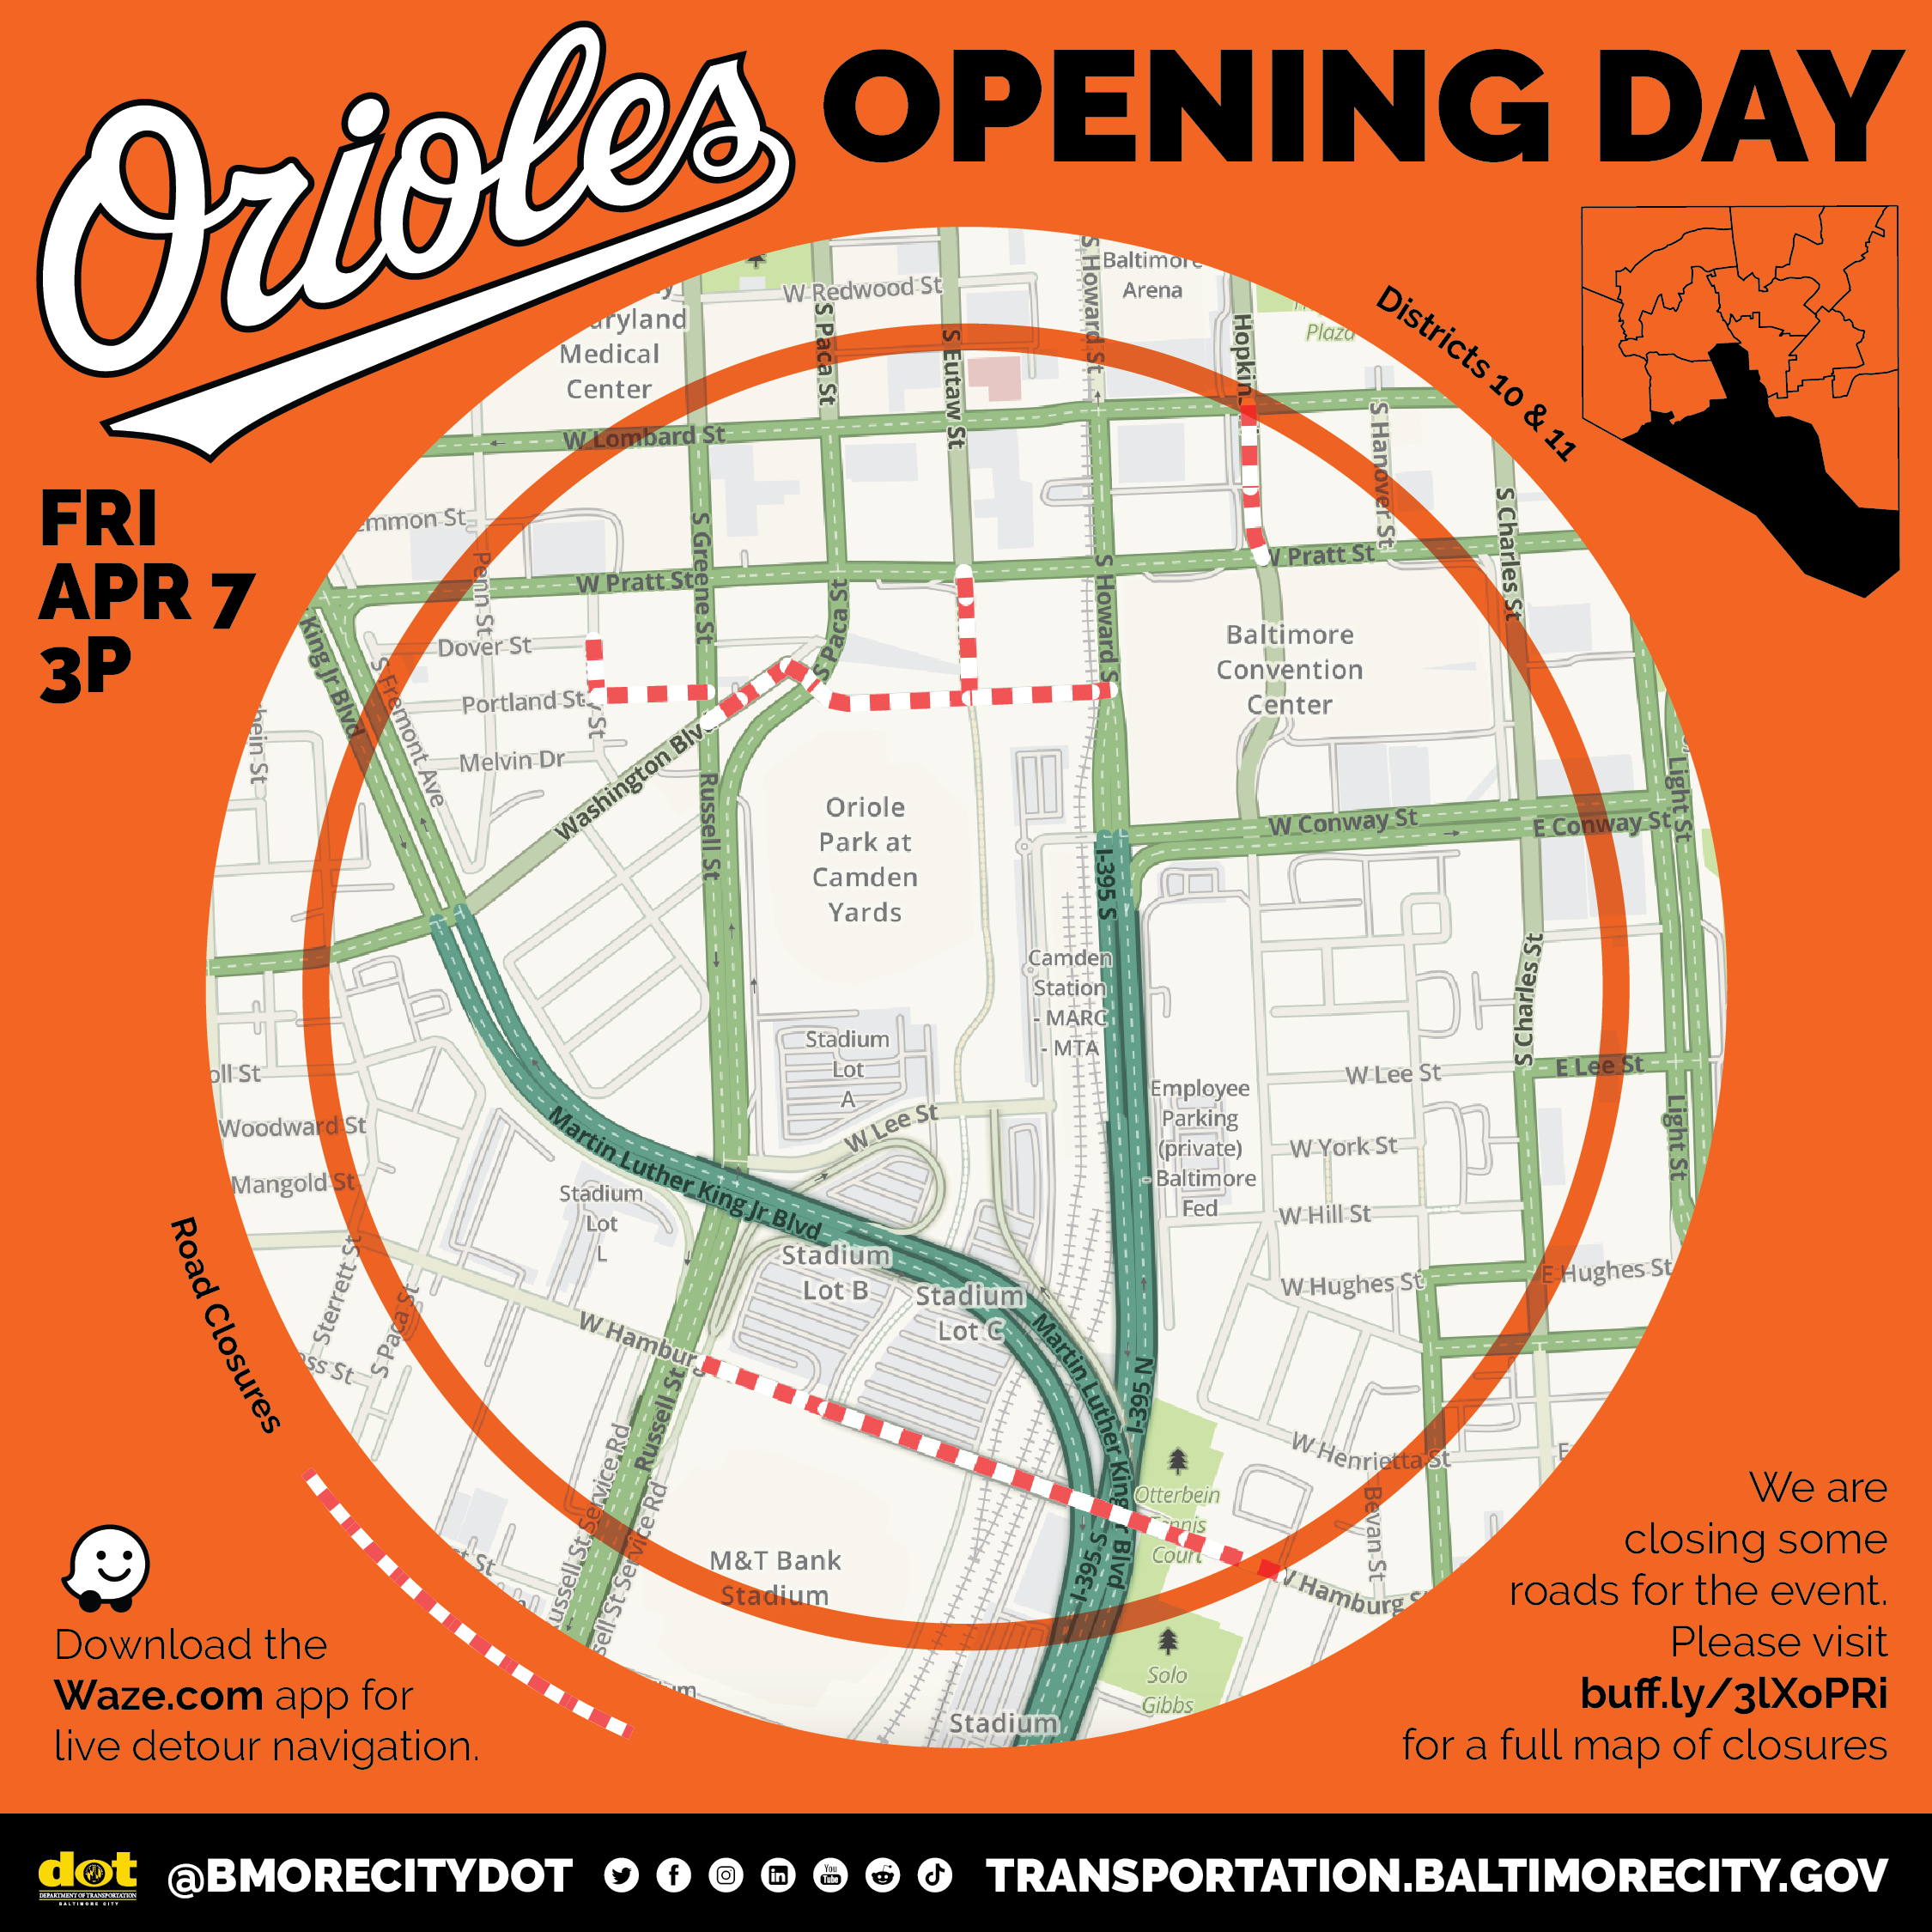 Revised Traffic Modifications for the Baltimore Orioles Opening Day